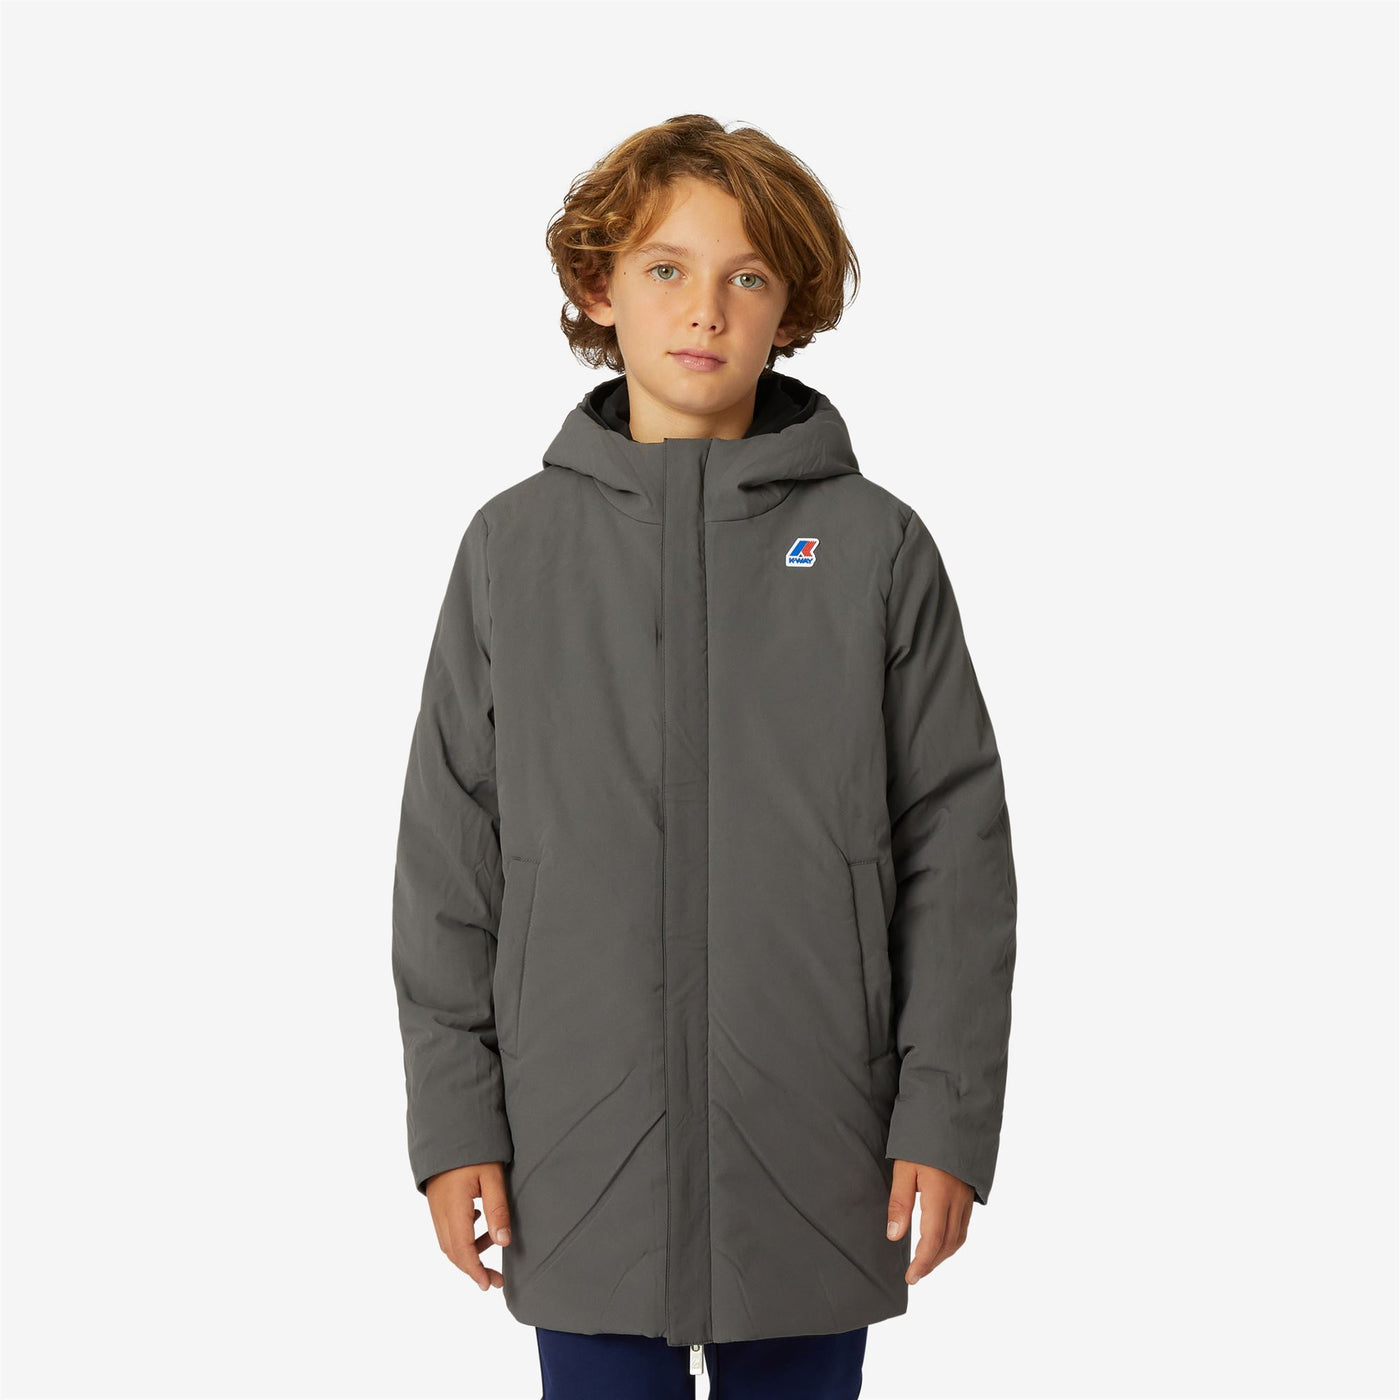 Jackets Boy P. JACOB WARM DOUBLE 3/4 Length BLACK PURE - GREY SMOKED | kway Detail Double				